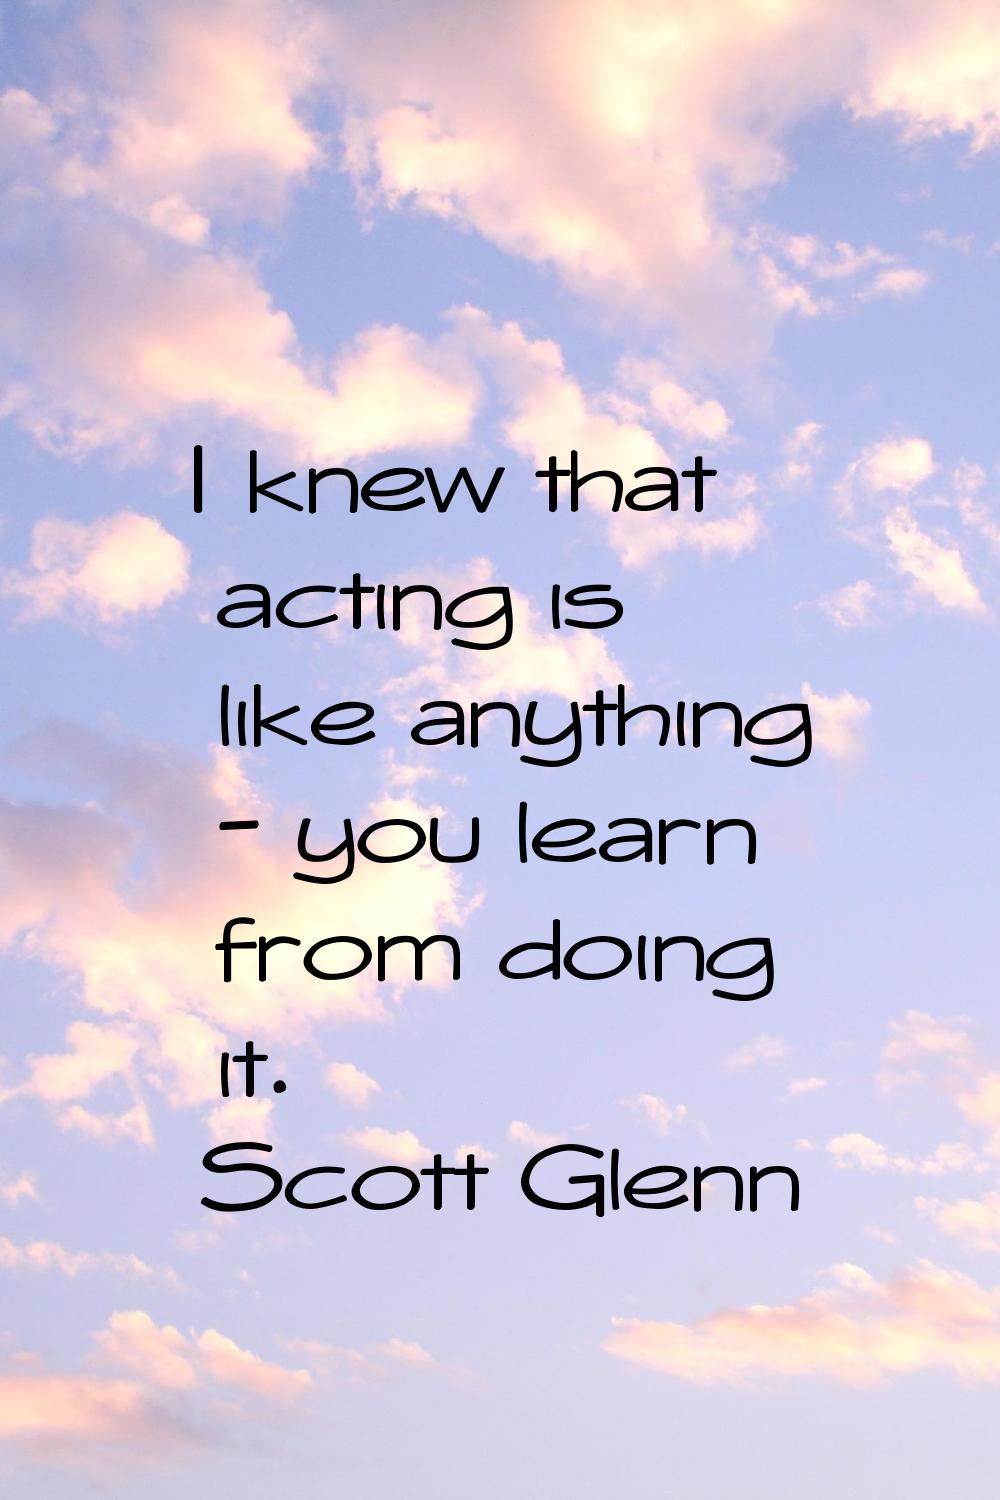 I knew that acting is like anything - you learn from doing it.